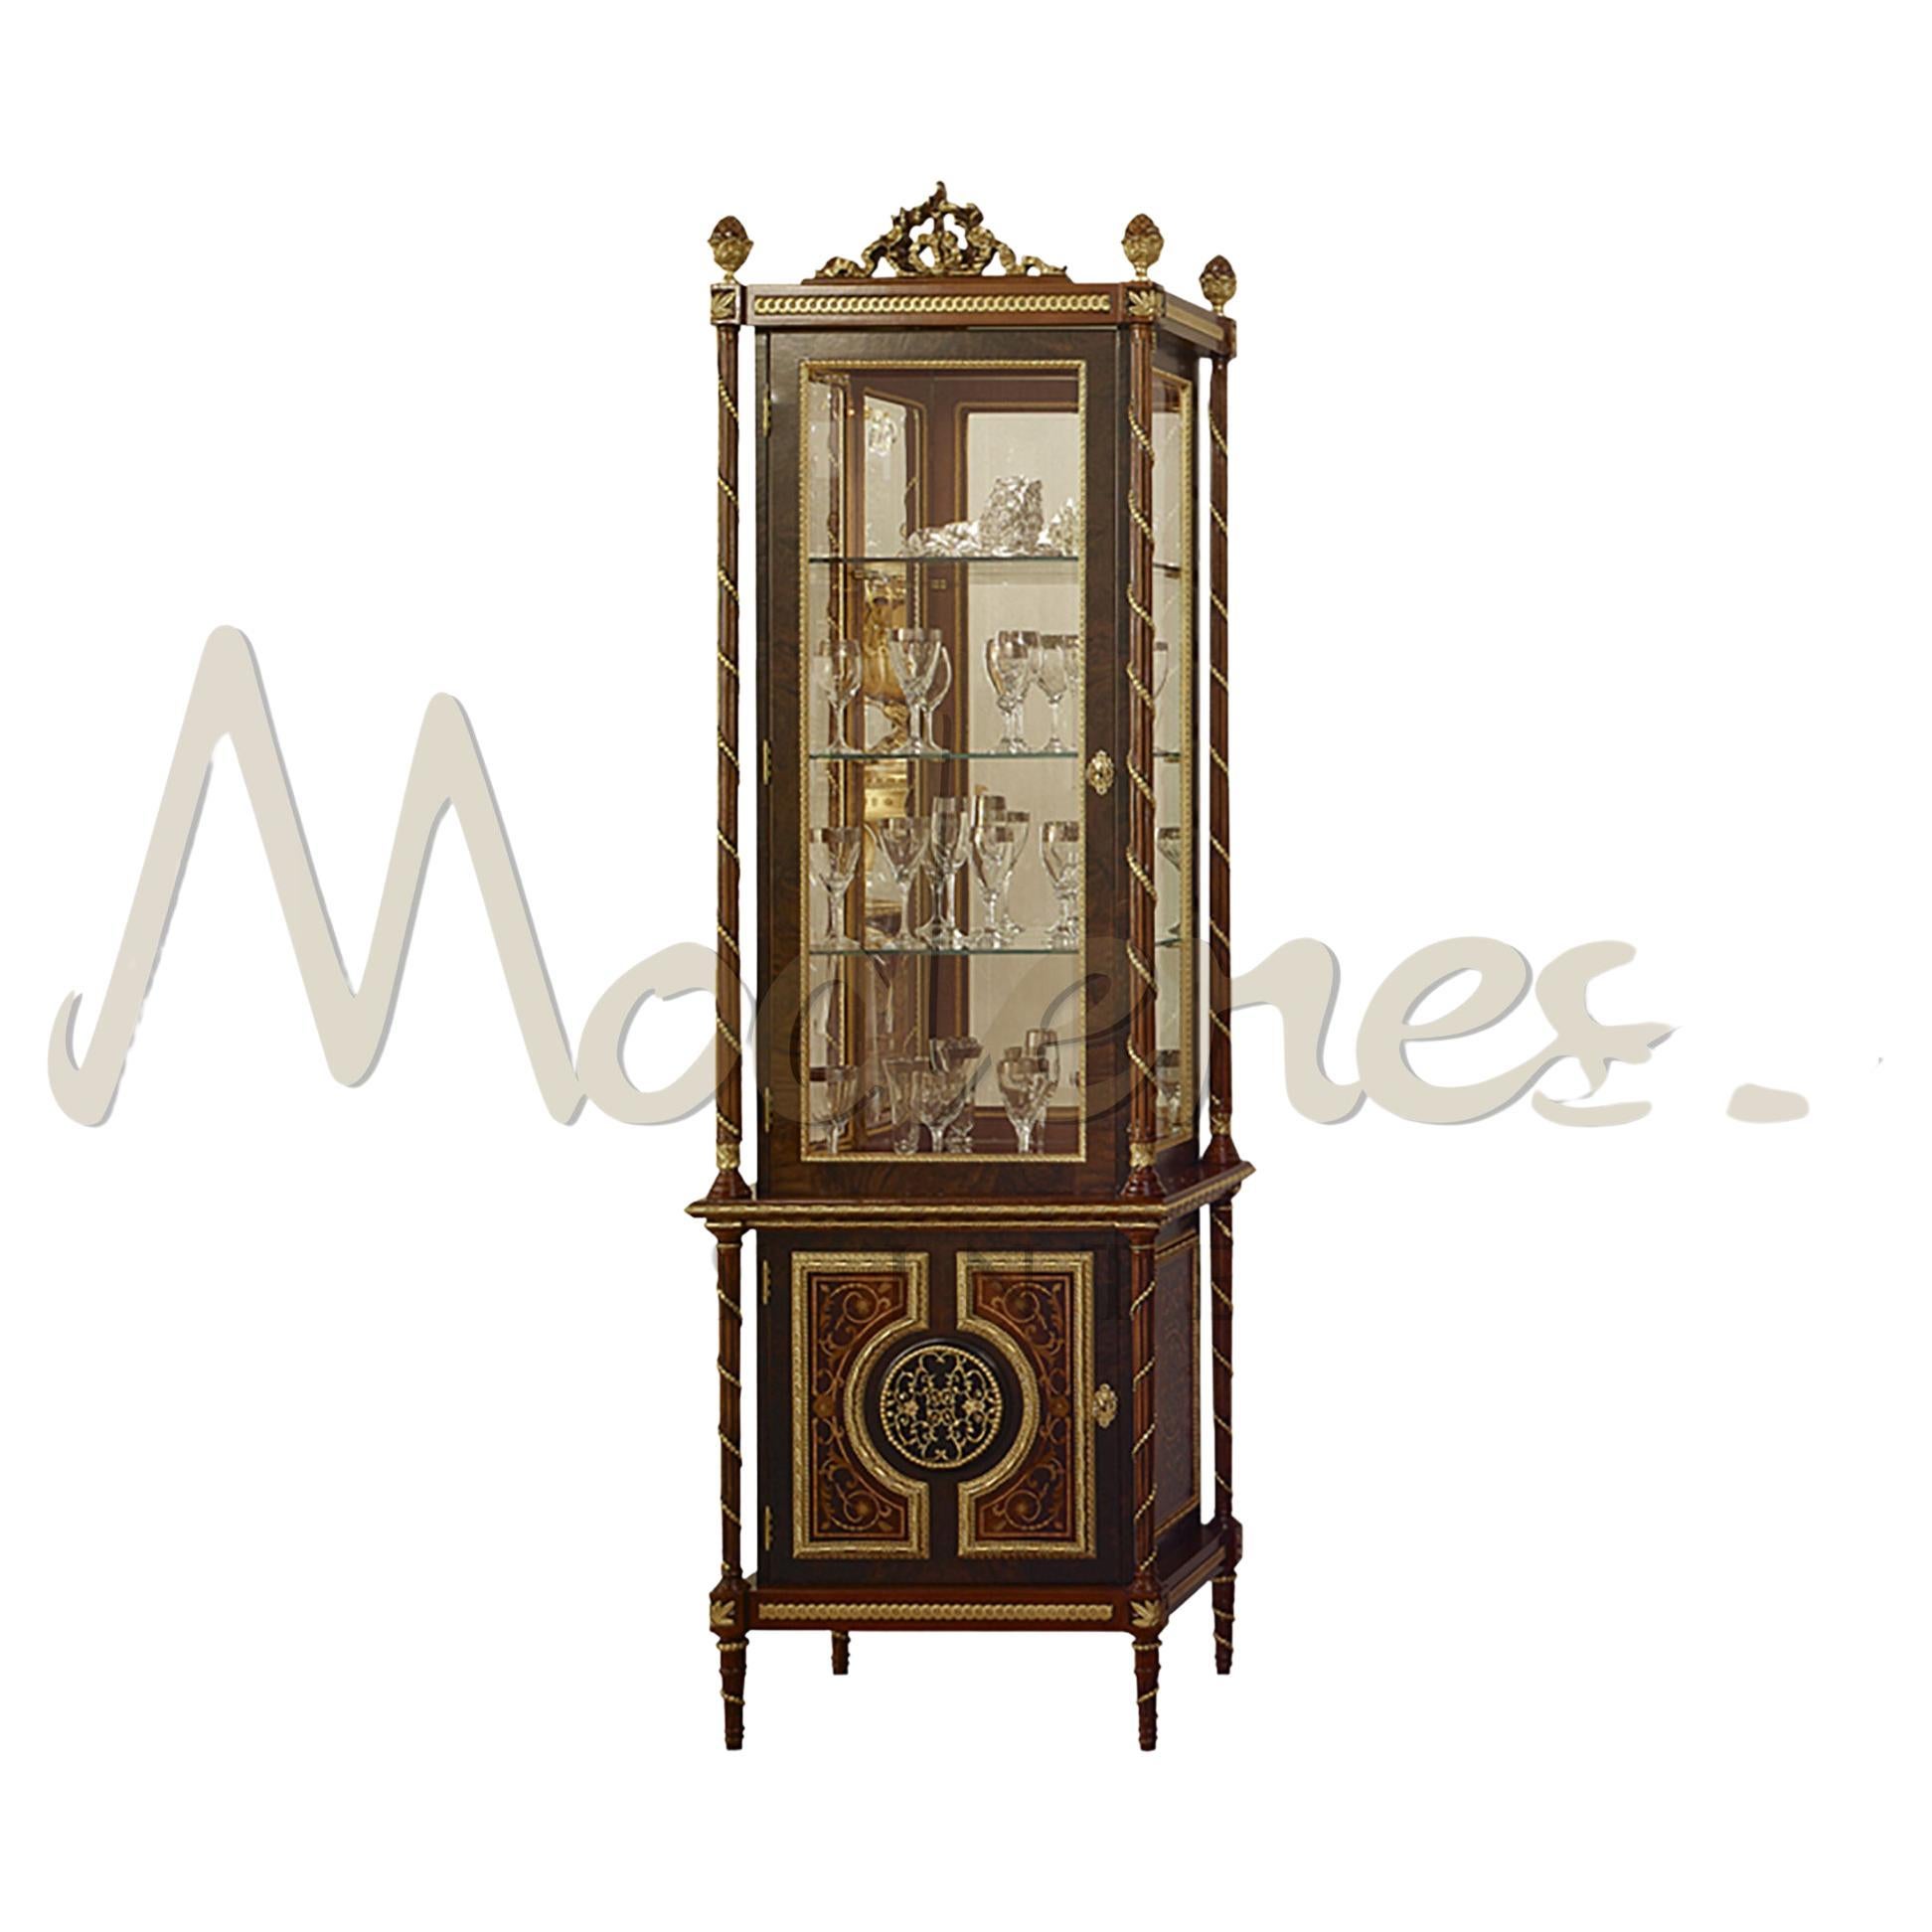 Turn your house into a lavish private residence with Modenese Gastone's Luxury furniture. Add this majestic three-sides vitrine in a revisited empire-style revival featuring precious radica inlays made from different wood types and gold leaf